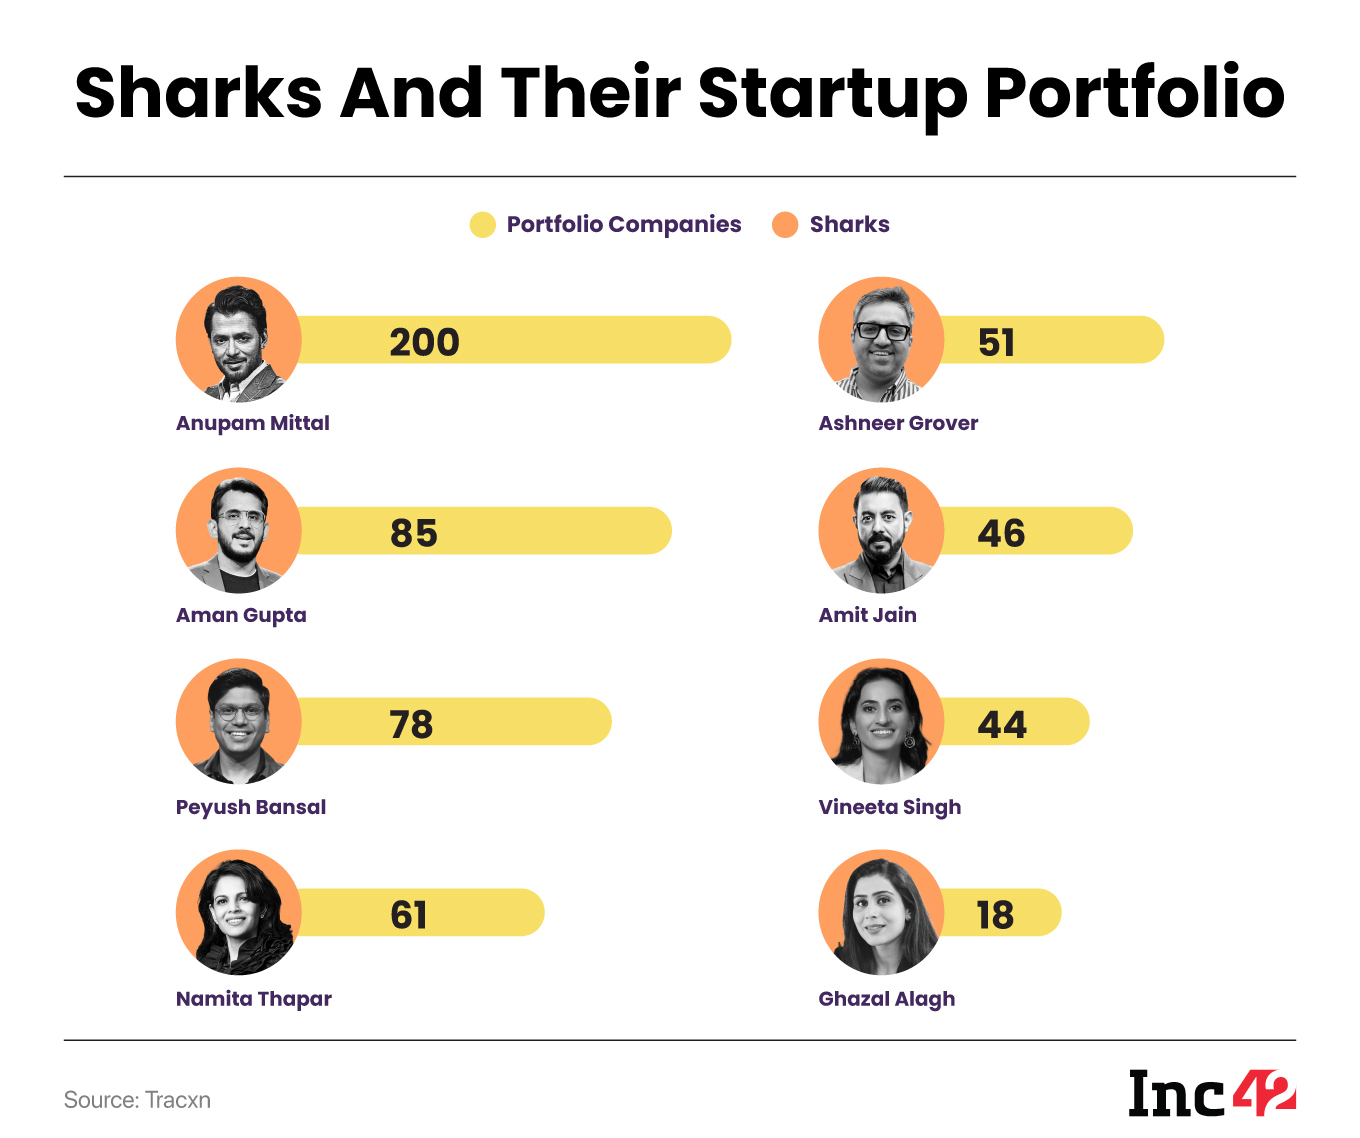 ‘Sharks’ have directly connected with Indian households, igniting the spirit of enterprise and the hope that they, too, could become the country’s top entrepreneurs.